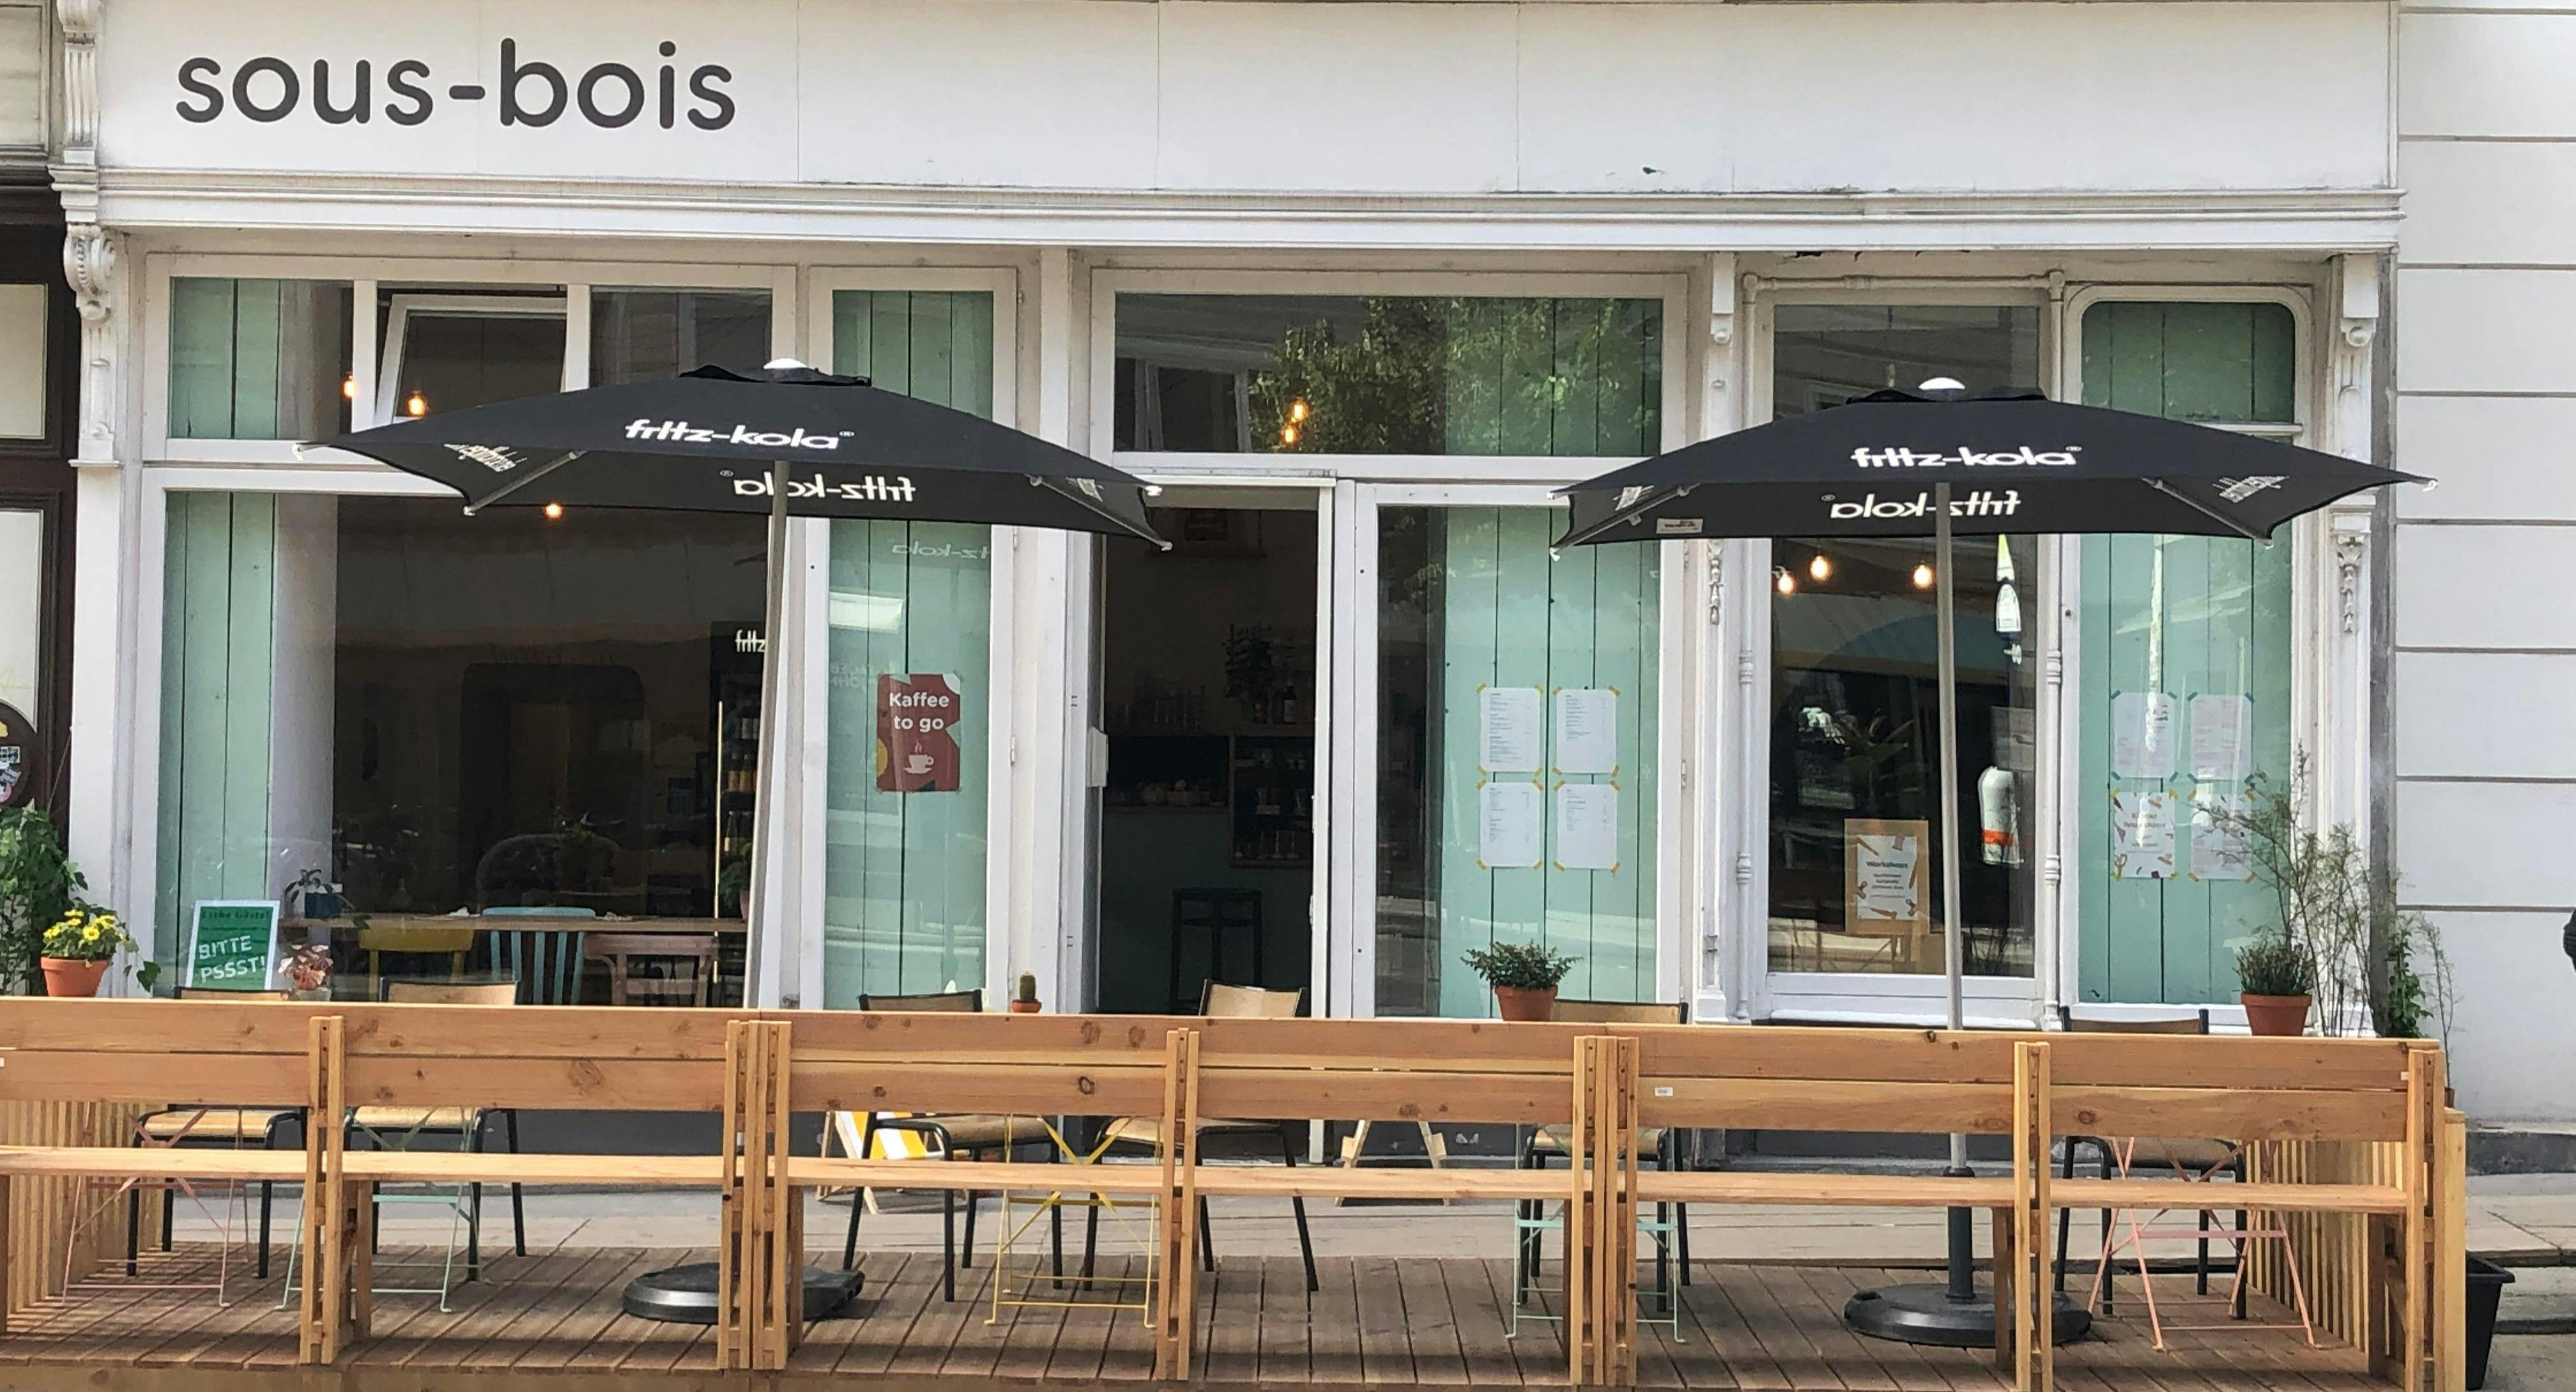 Photo of restaurant sous-bois in 7. District, Vienna